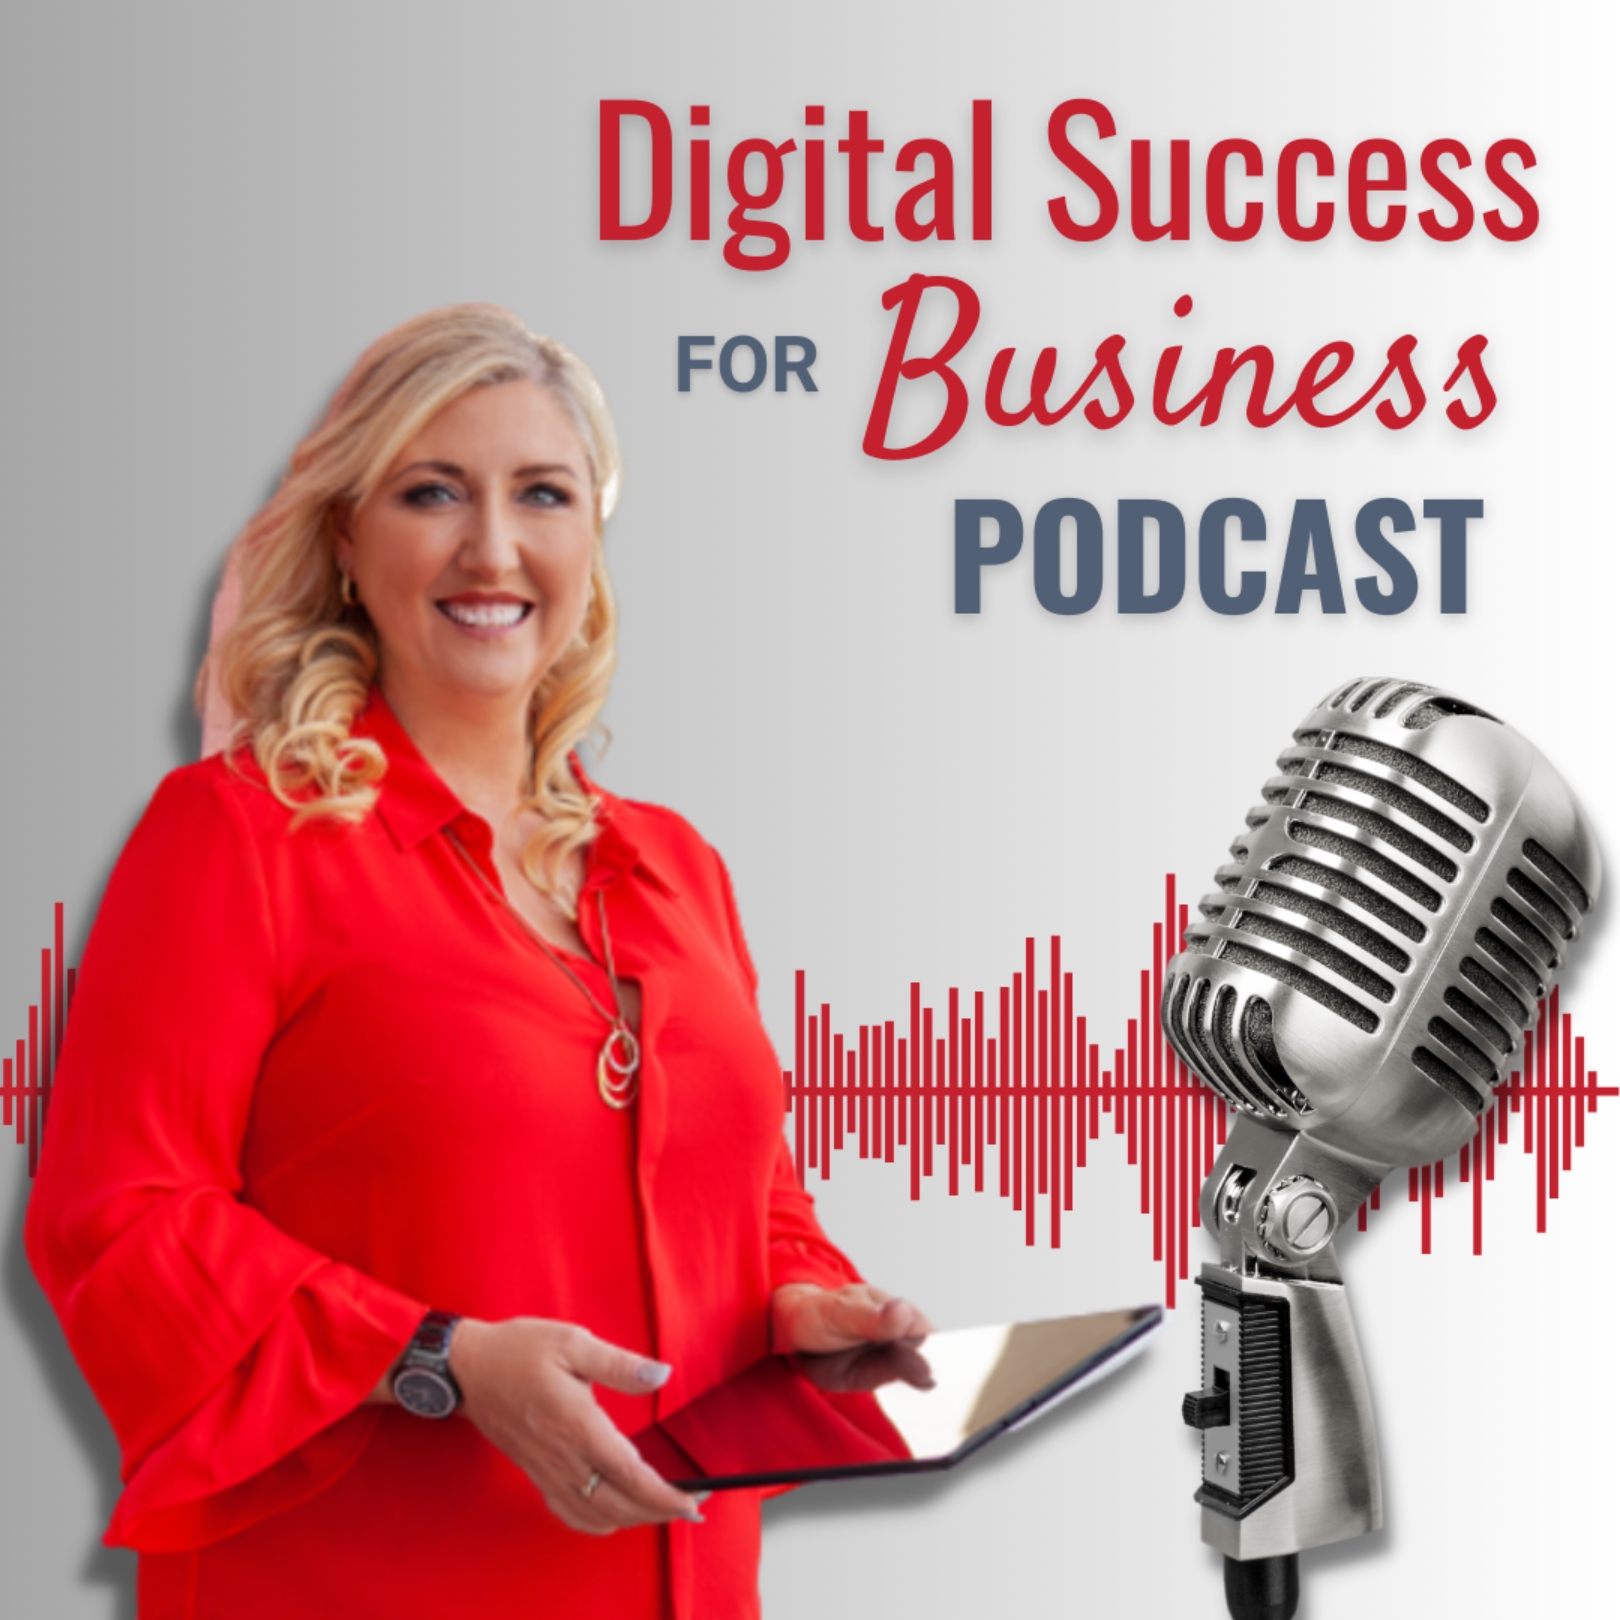 The Digital Success For Business Podcast